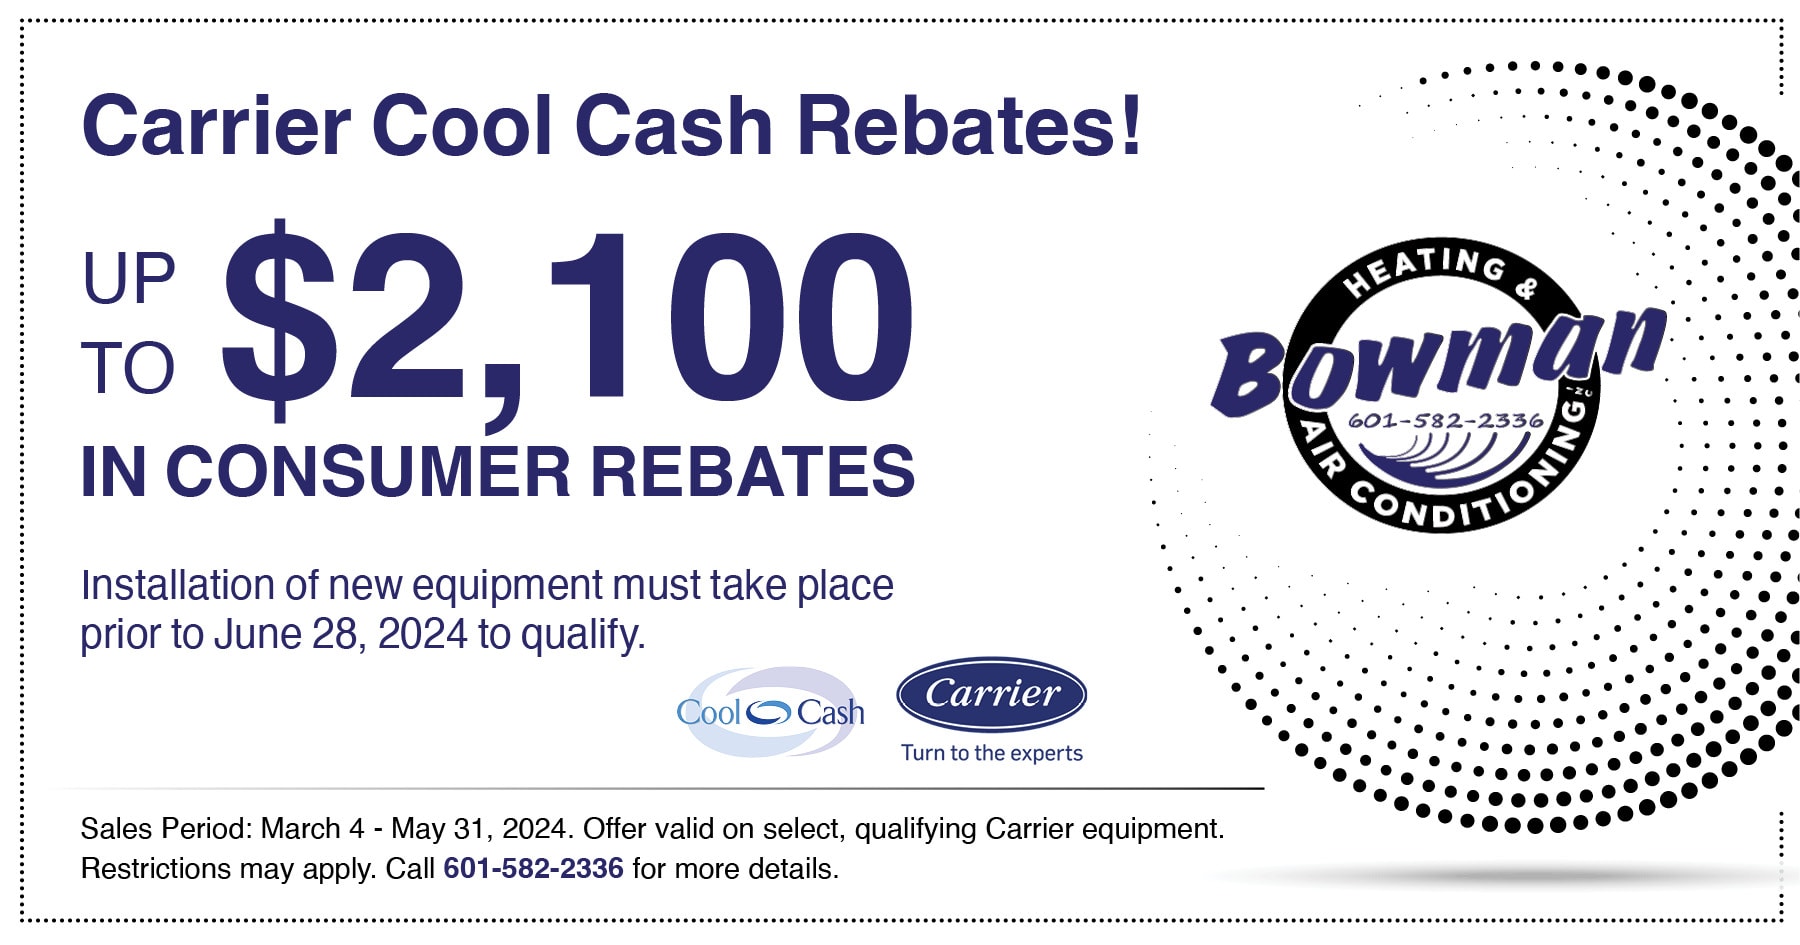 Carrier Cool Cash Rebates of up to $2100. Sales period is March 4 - May 31 2024